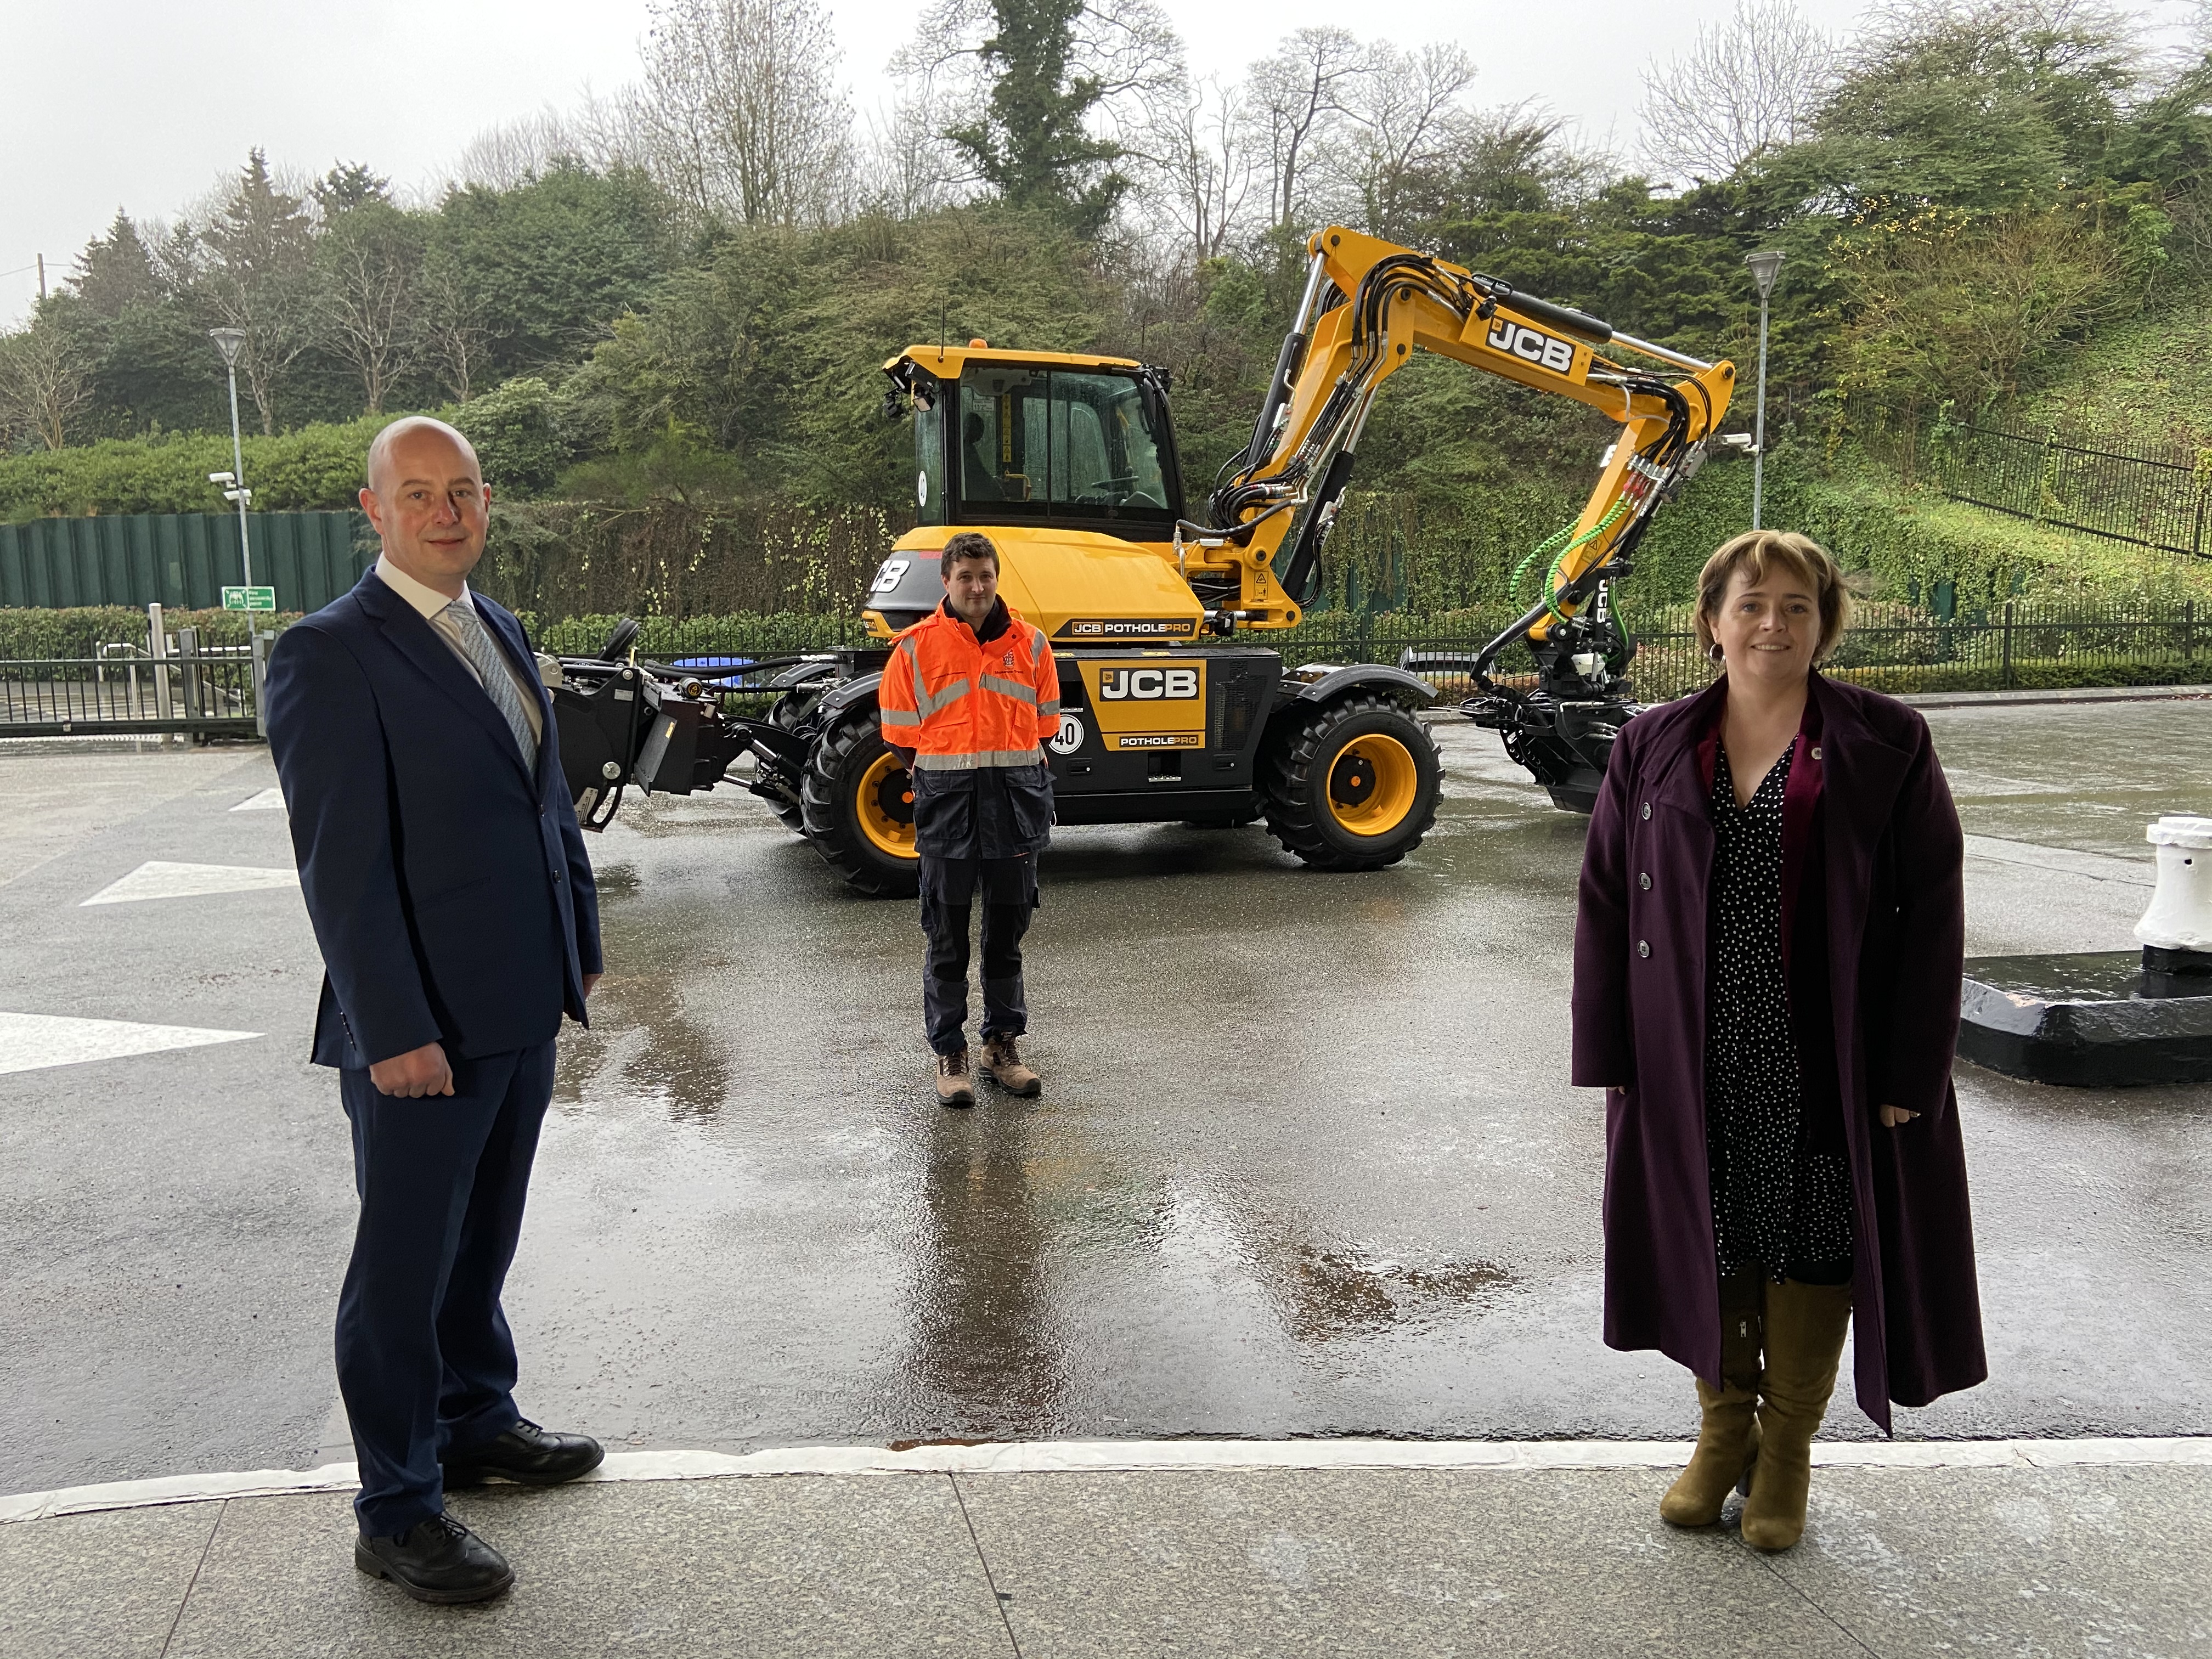 With Paul Murray, JCB Product Manager & James Harper from Stoke-on-Trent City Council Highways Team - and the JCB Pothole Pro.